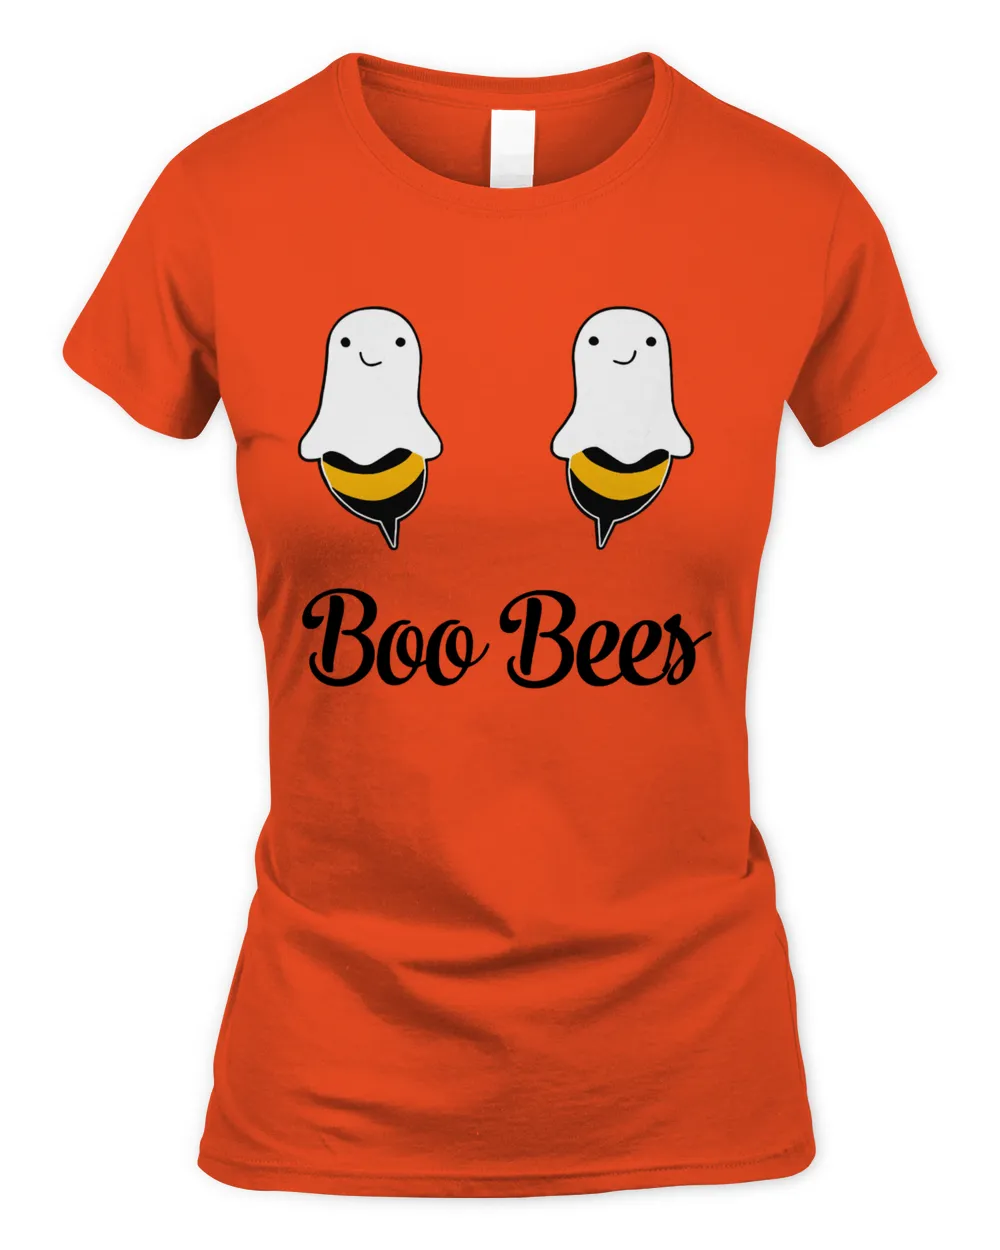 Boo Bees T-Shirt, Unique Boo Bees Shirt, Boo Bees Gift For Women